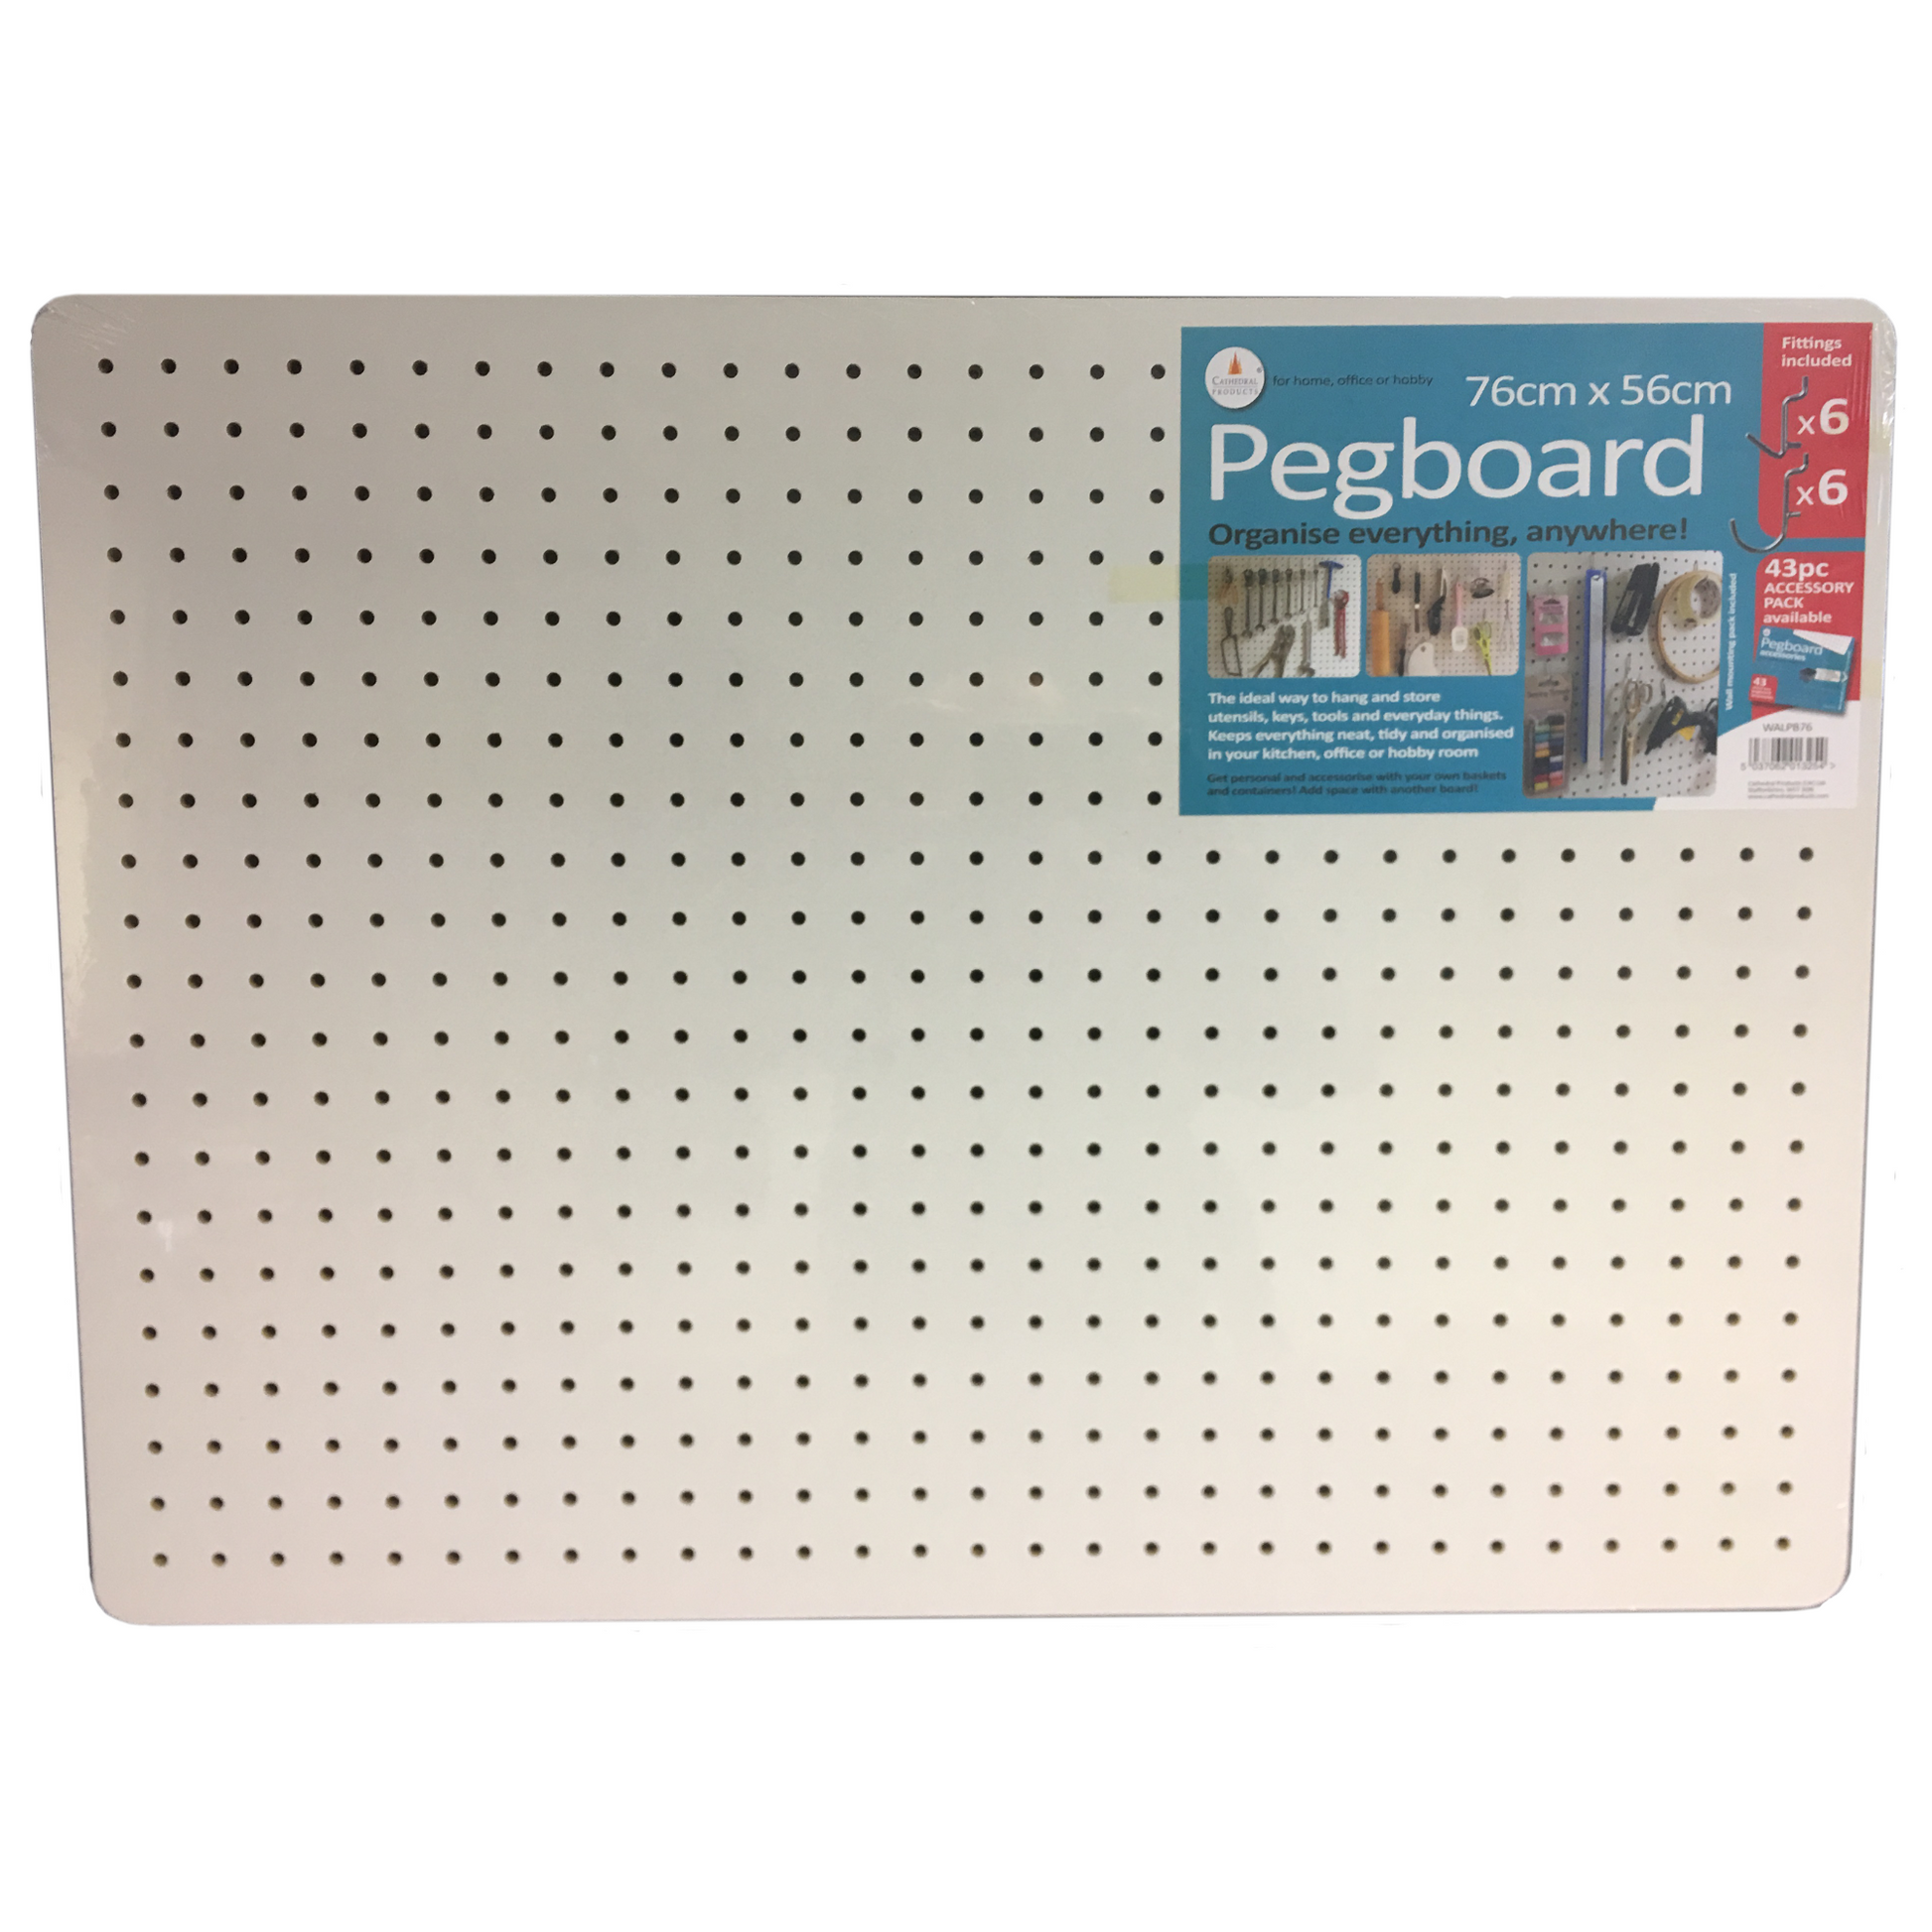 A white pegboard measuring 76x56cm with an attached packaging label that reads 'Pegboard - Organise everything, anywhere!' along with '43pc accessory pack available' and 'Fittings included x12.' The label shows images of the pegboard in use, holding various tools and utensils.